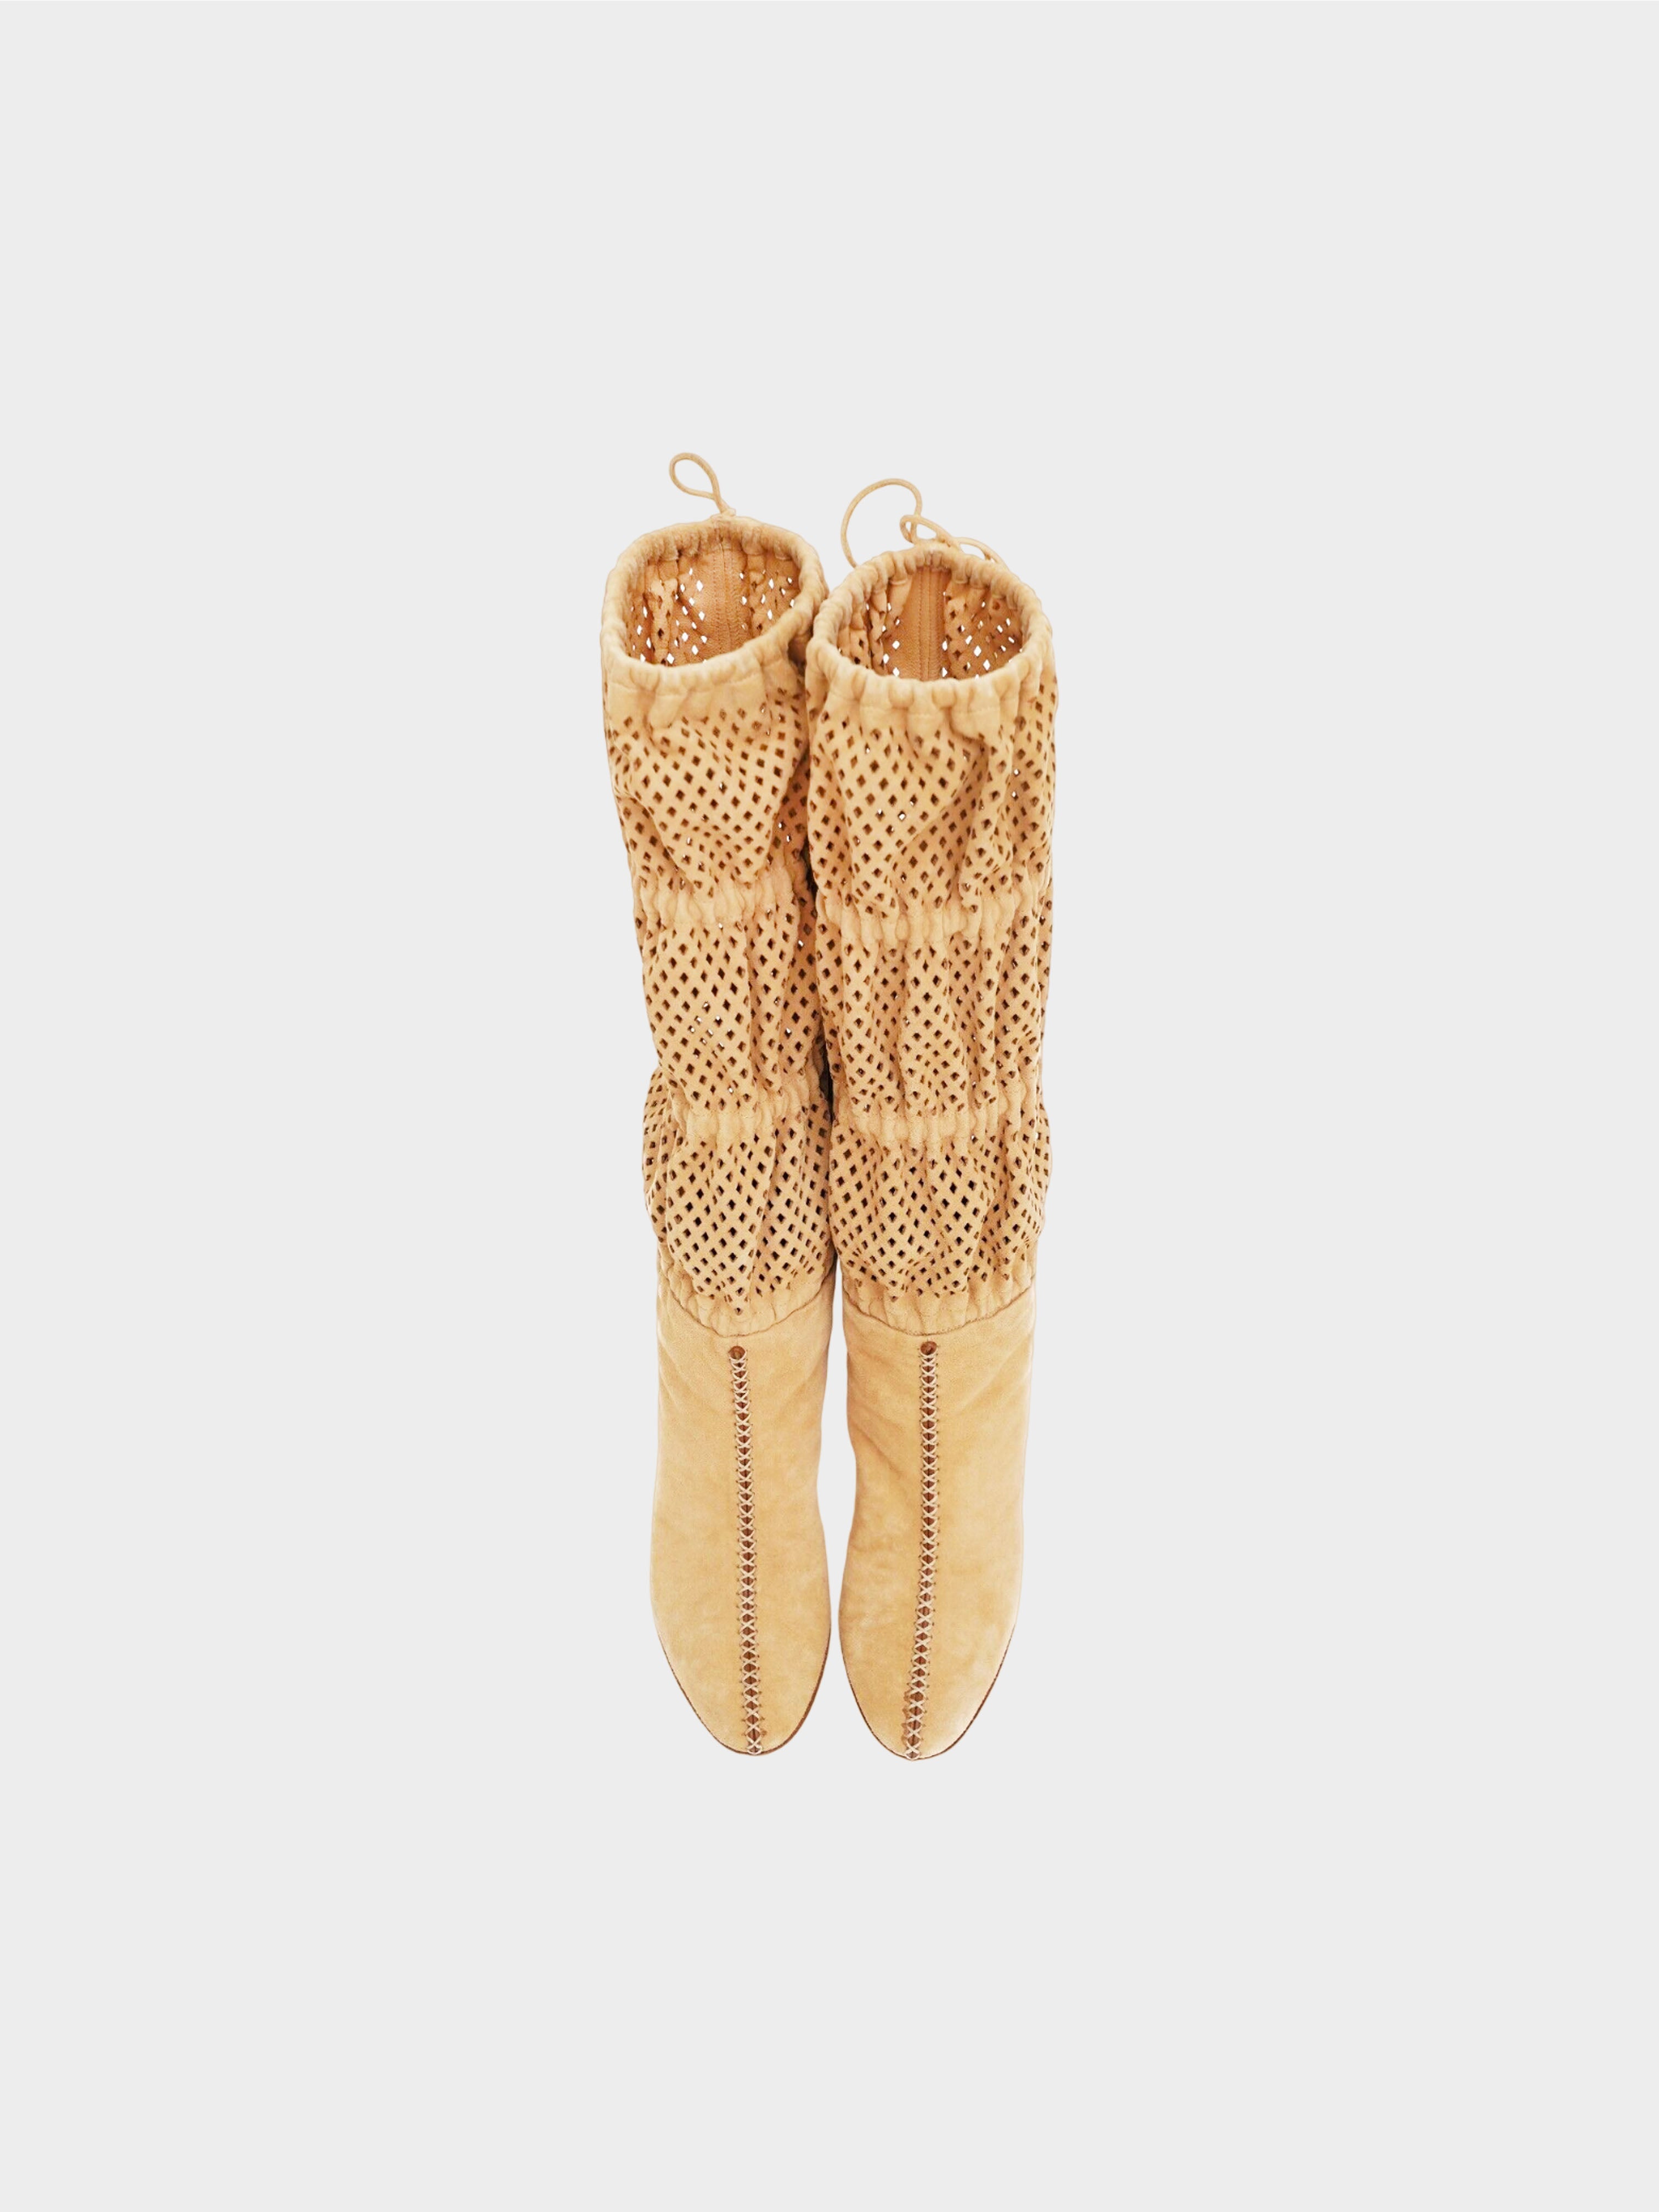 Roberto Cavalli 2000s Beige Perforated Knee Length Suede Boots